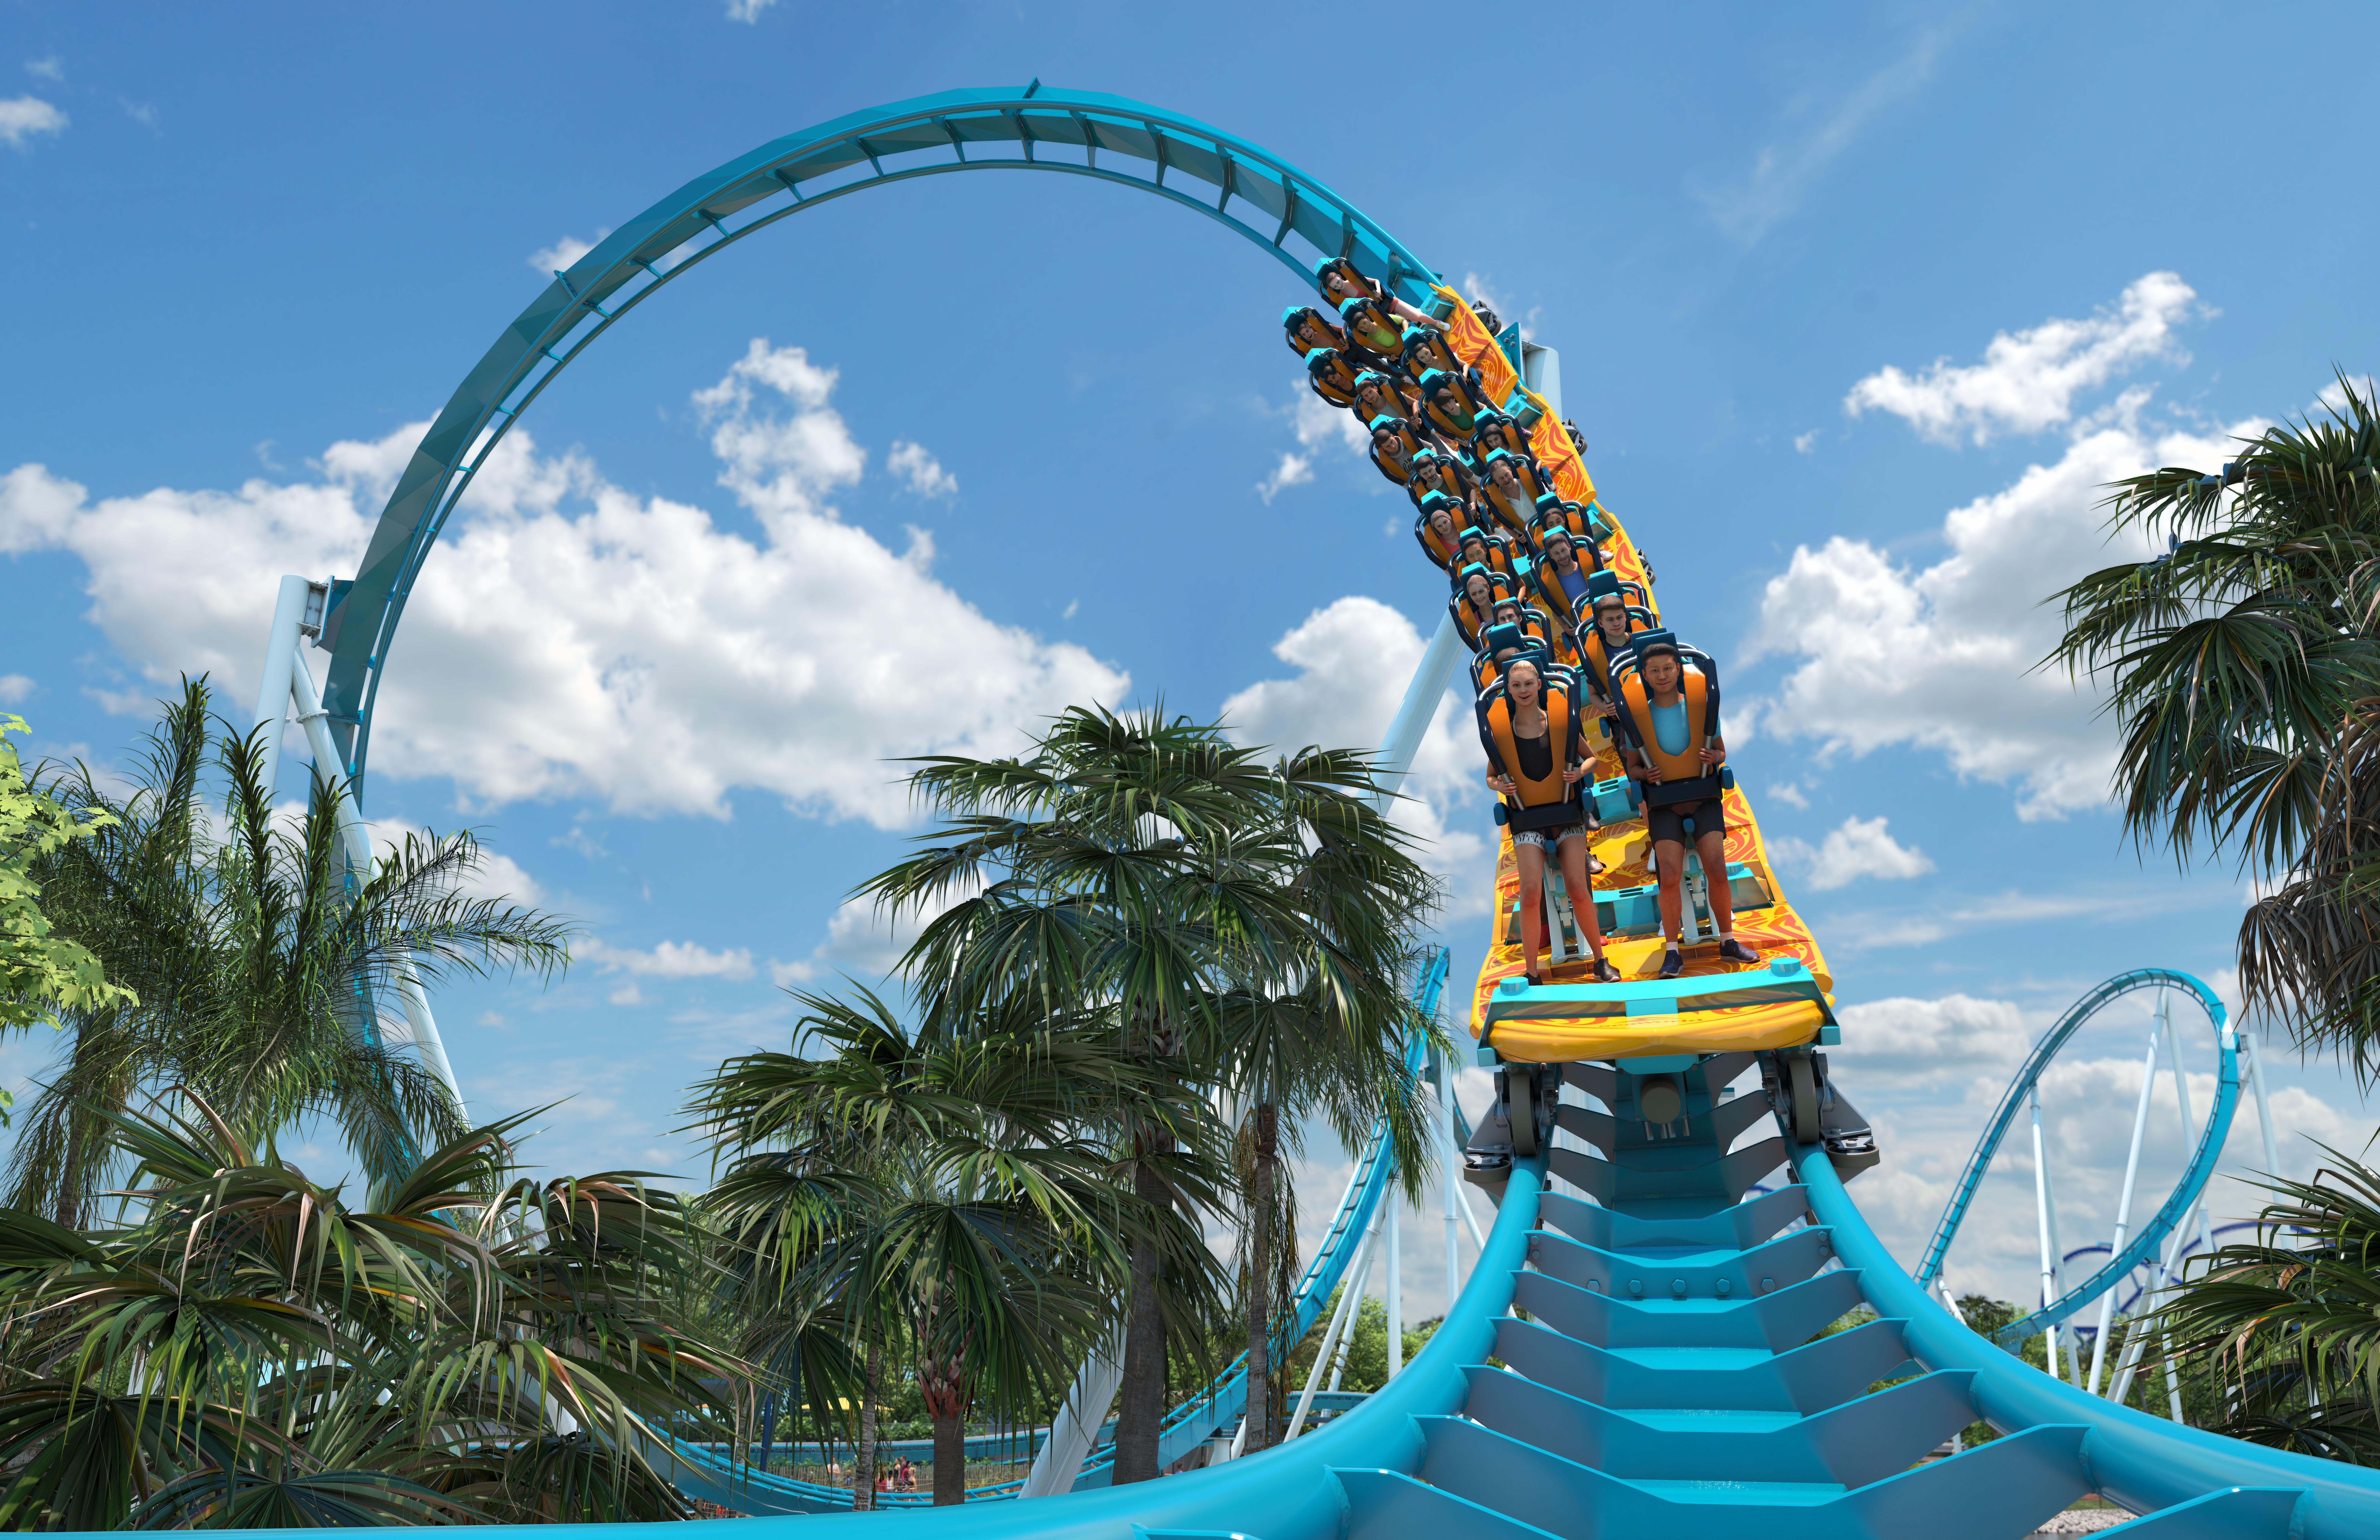 Pipeline: The Surf Coaster now open at SeaWorld Orlando